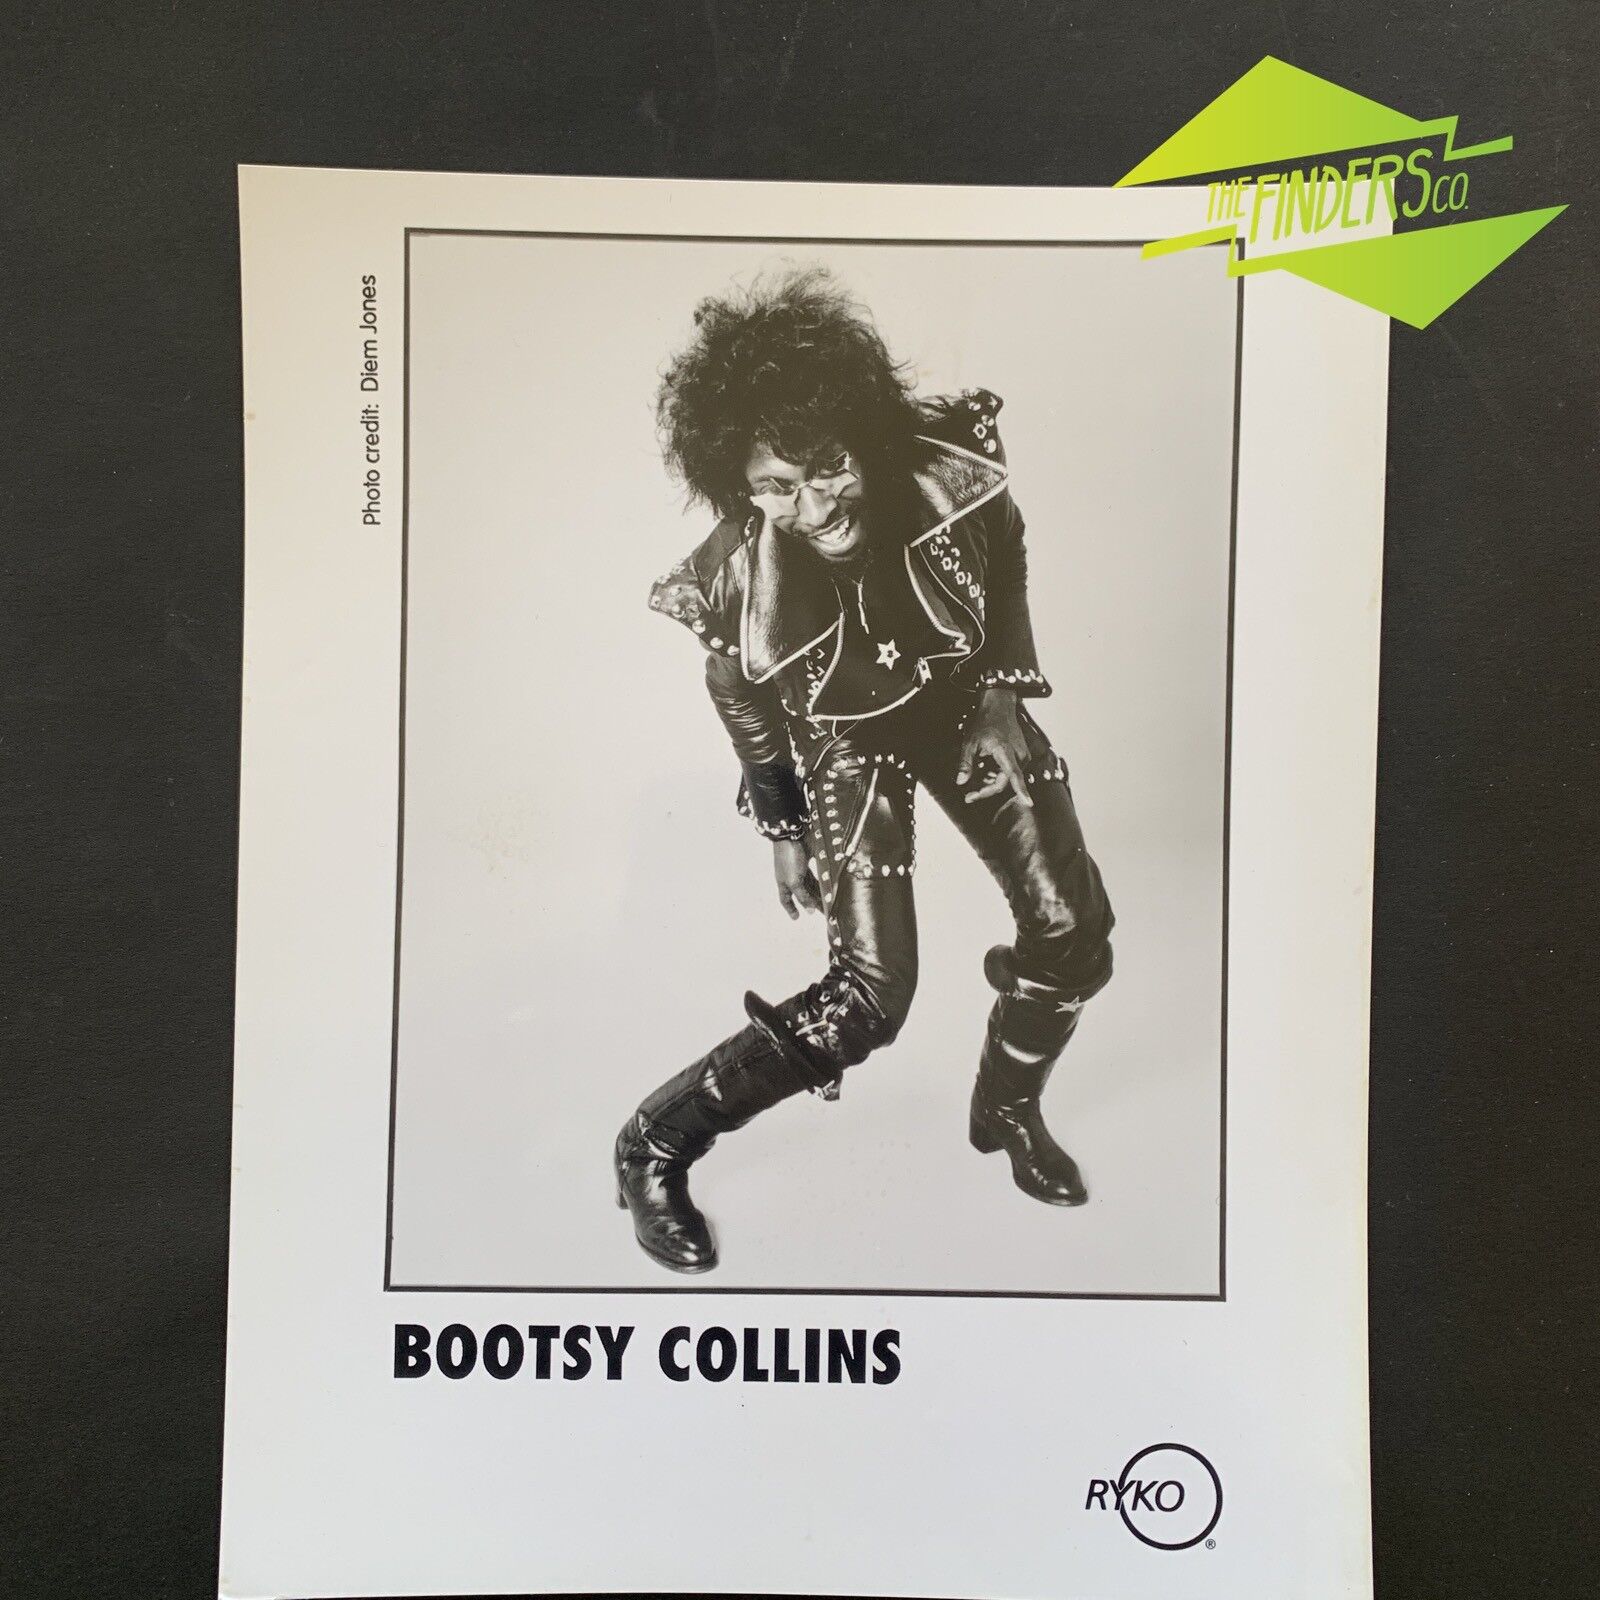 GENUINE 1990's 'BOOTSY COLLINS' RYKO RECORDS PRESS RELEASE BAND PHOTO